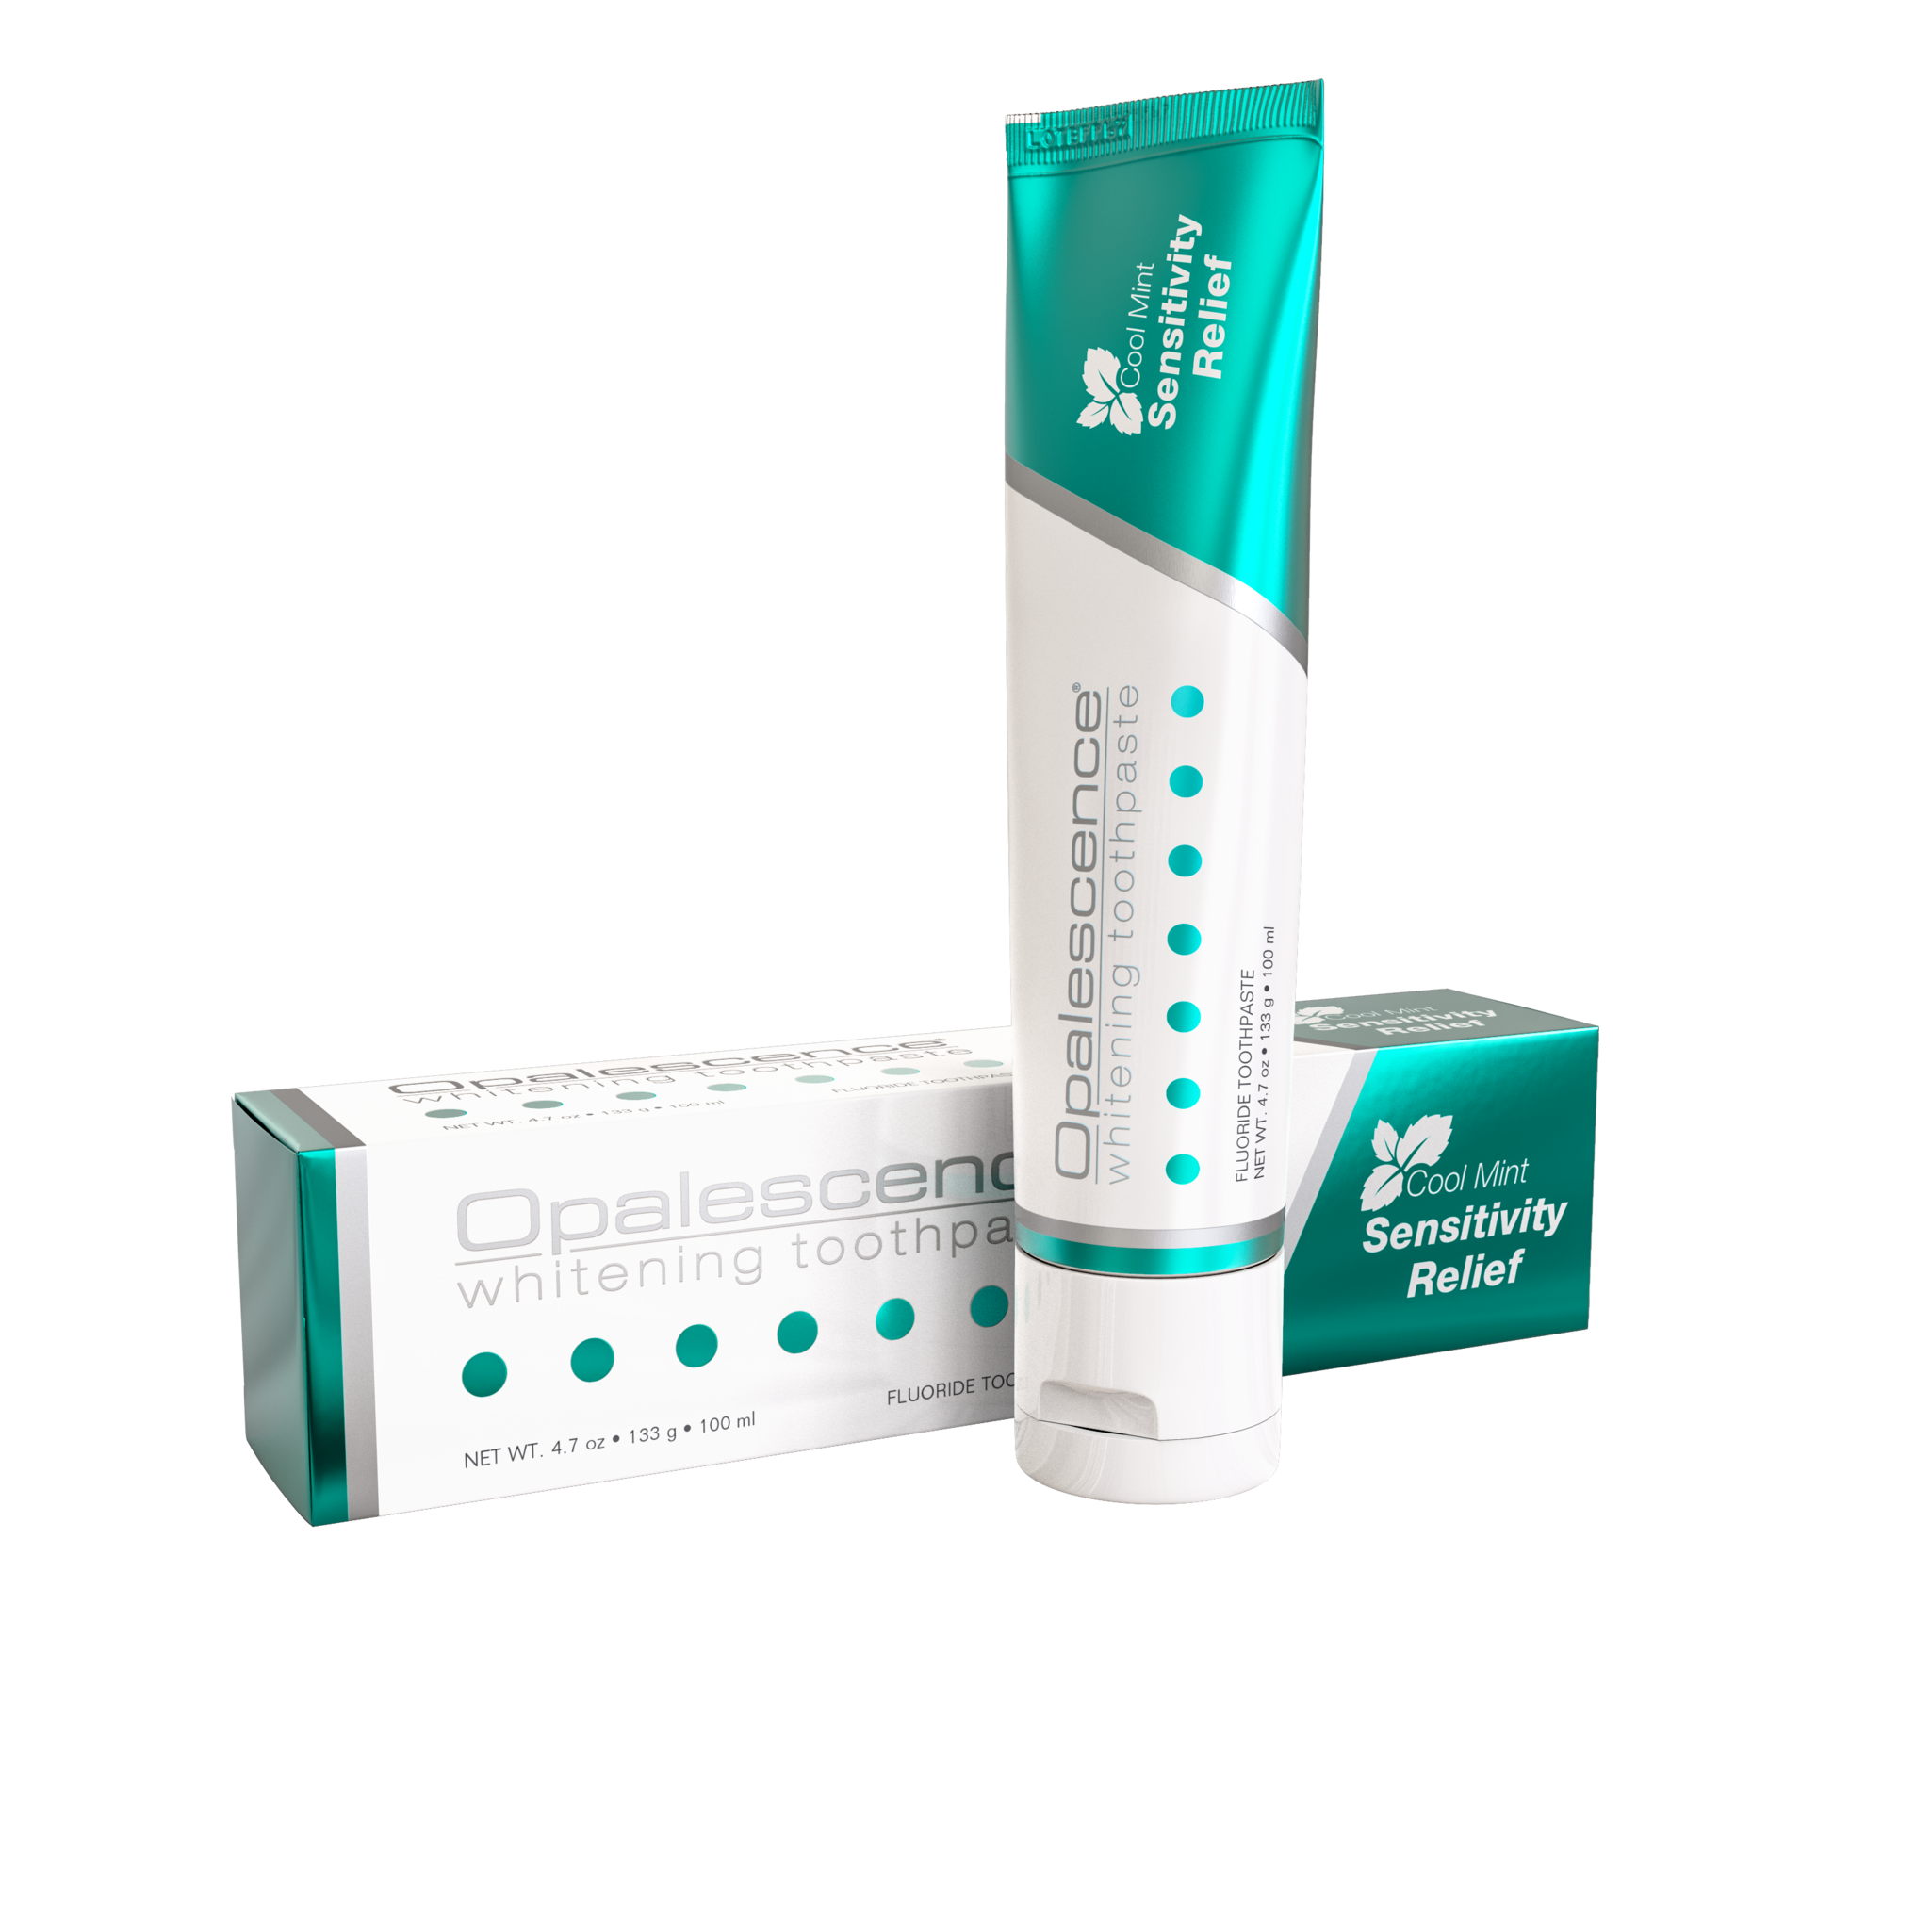 Opalescence Sensitivity Relief Toothpaste (133 г)